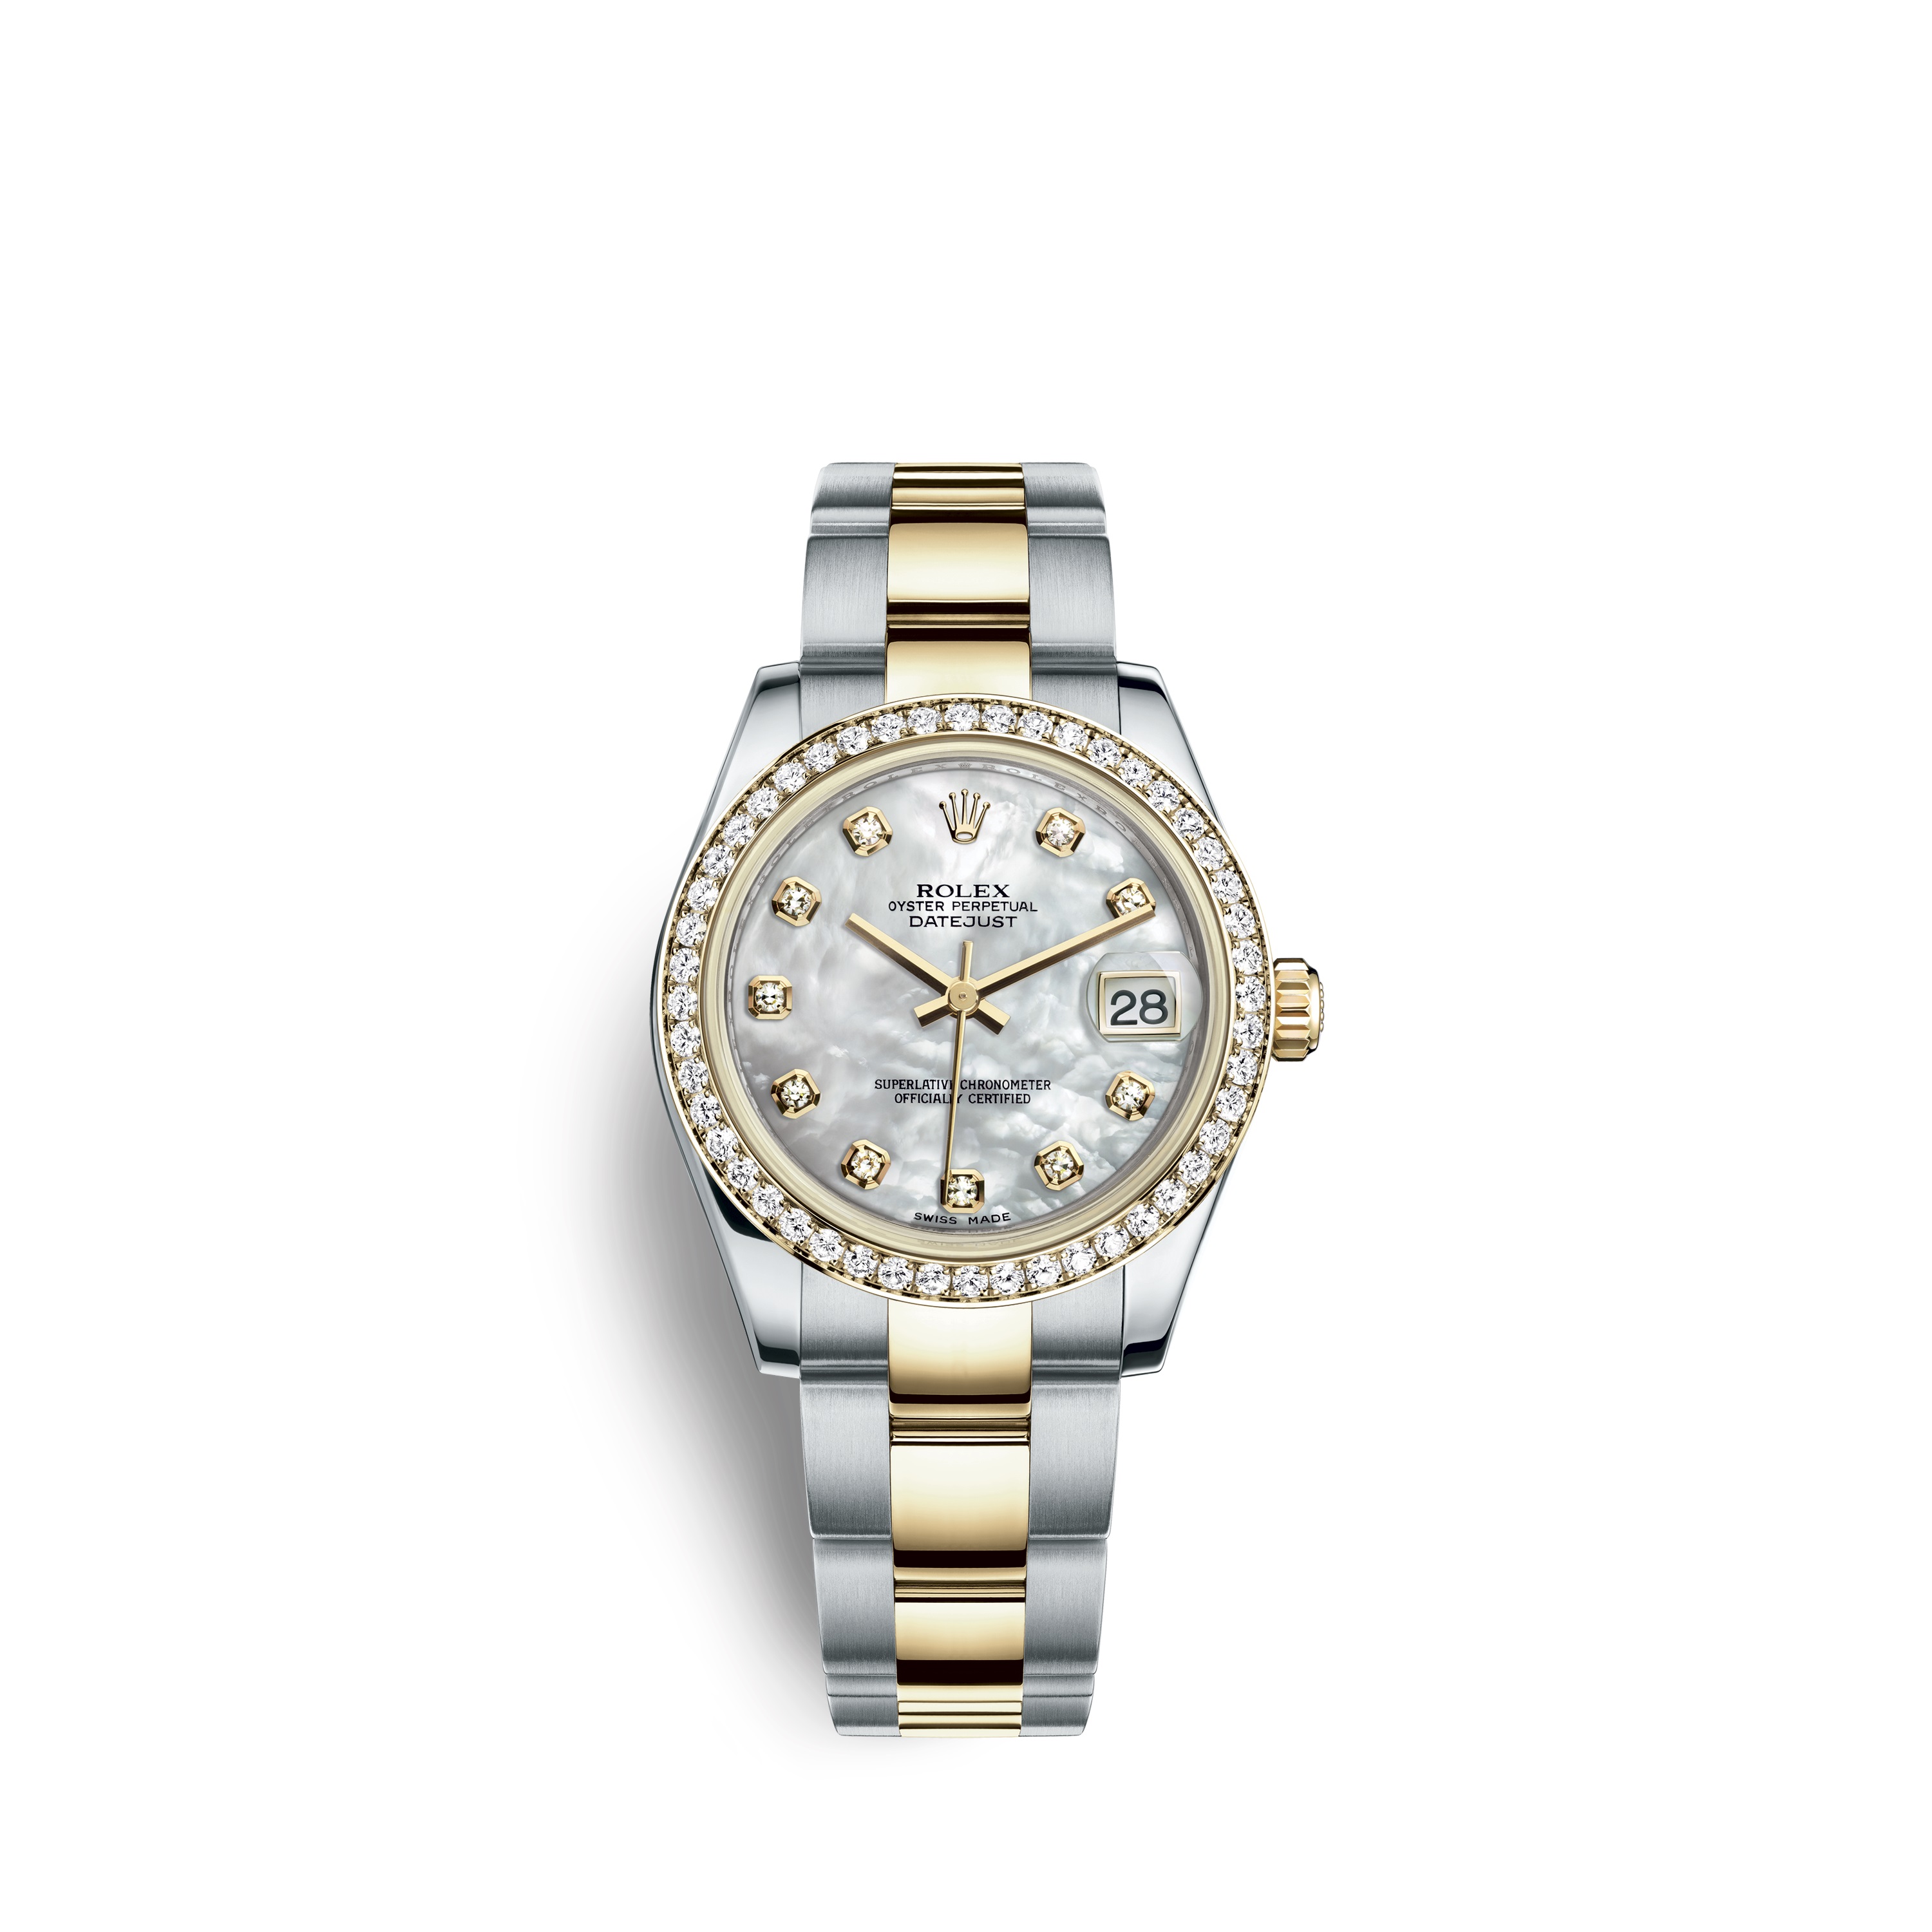 Datejust 31 178383 Gold and Stainless Steel watch (White Mother-of-Pearl Set with Diamonds)